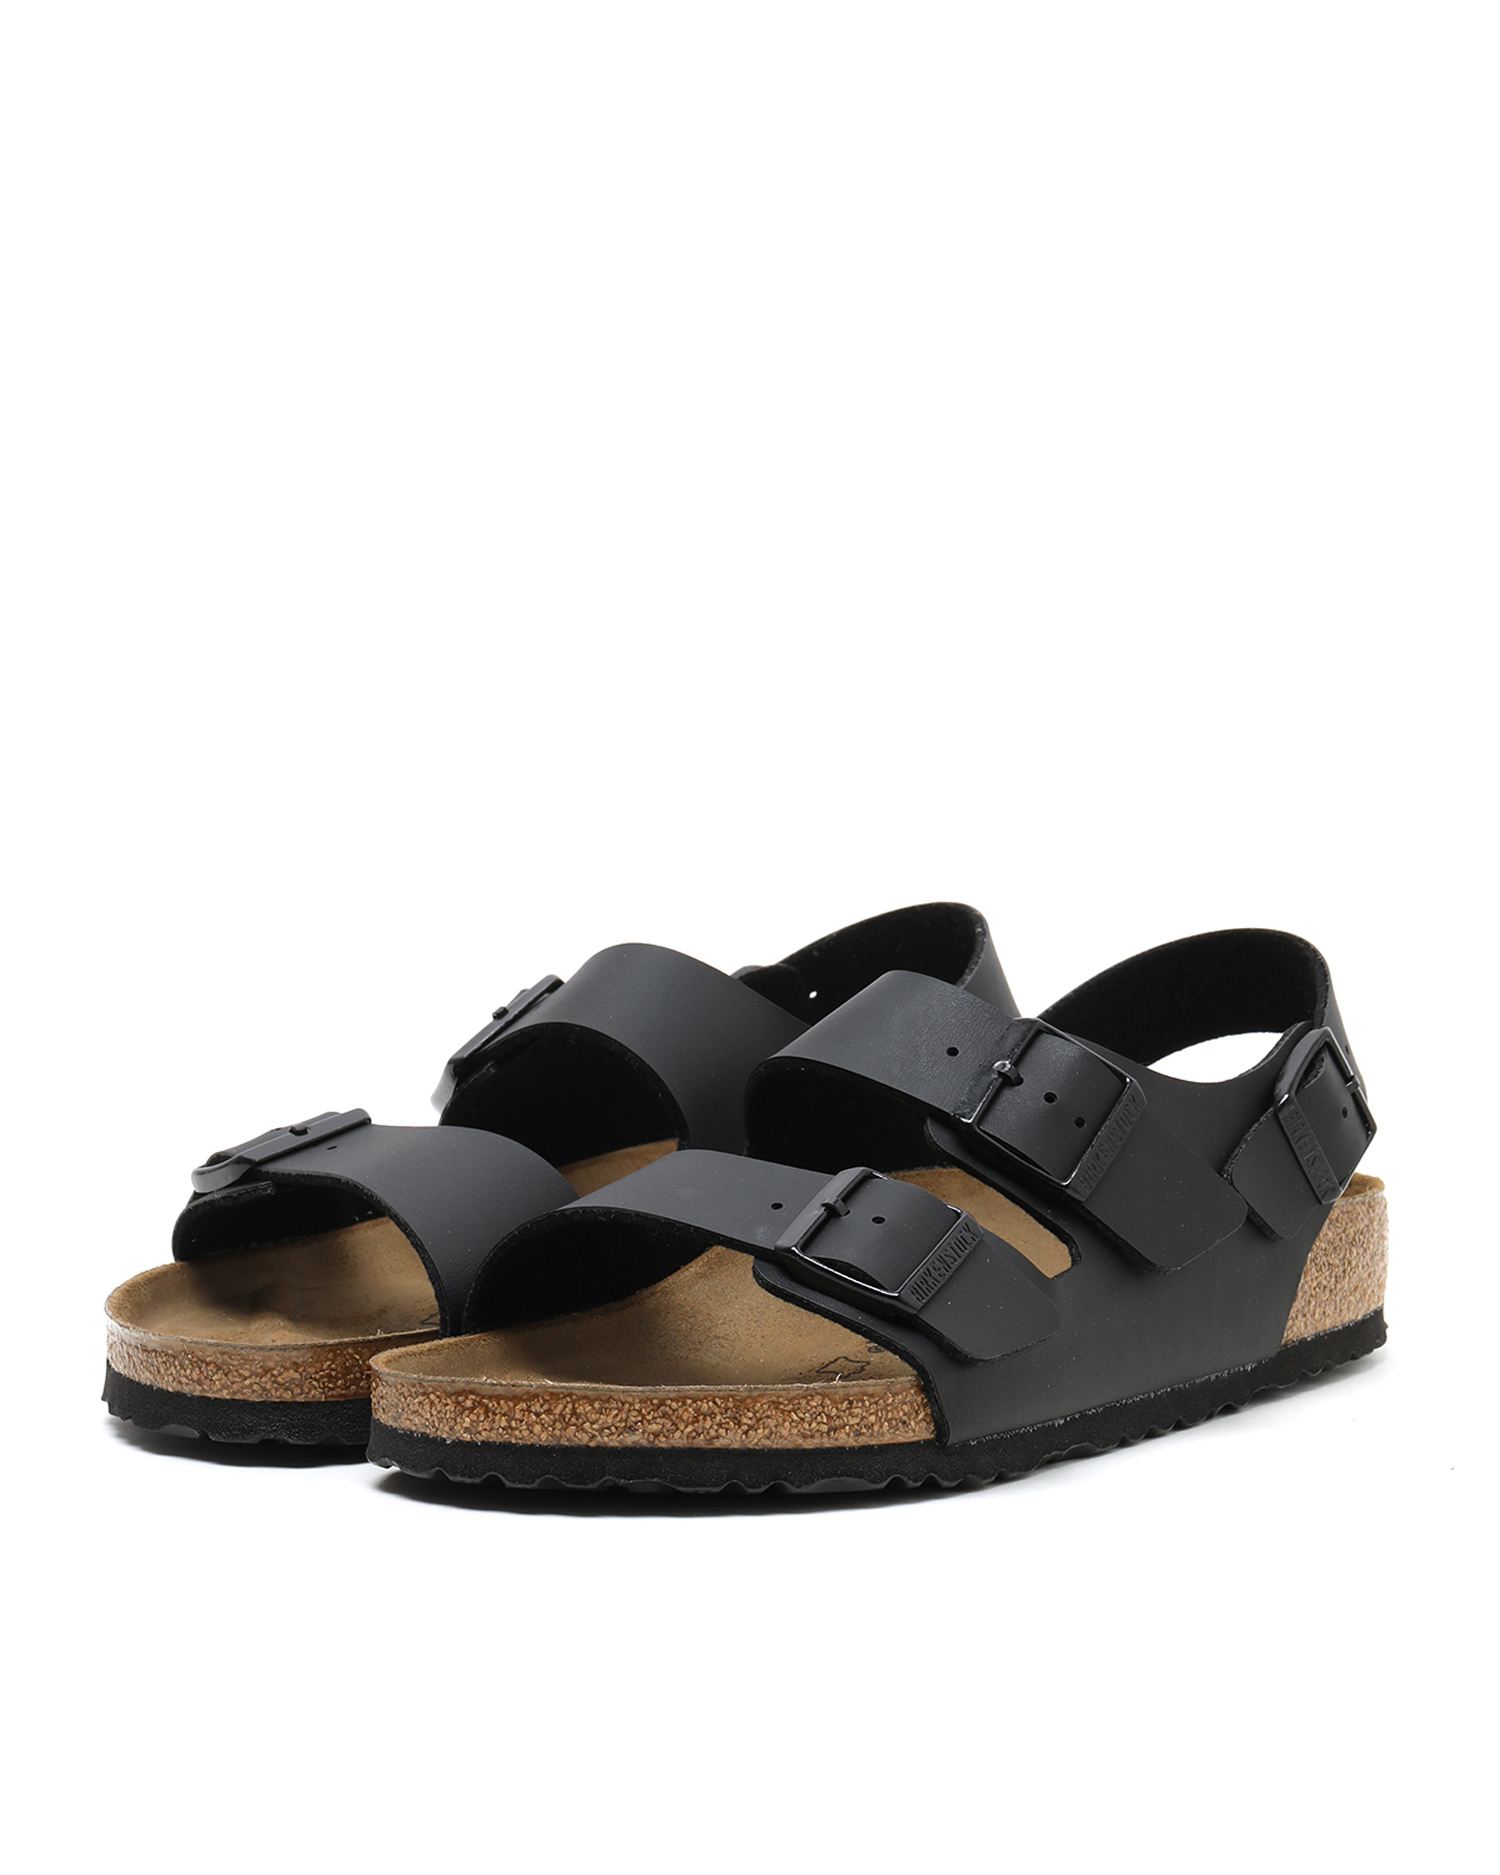 places that sell birkenstock sandals